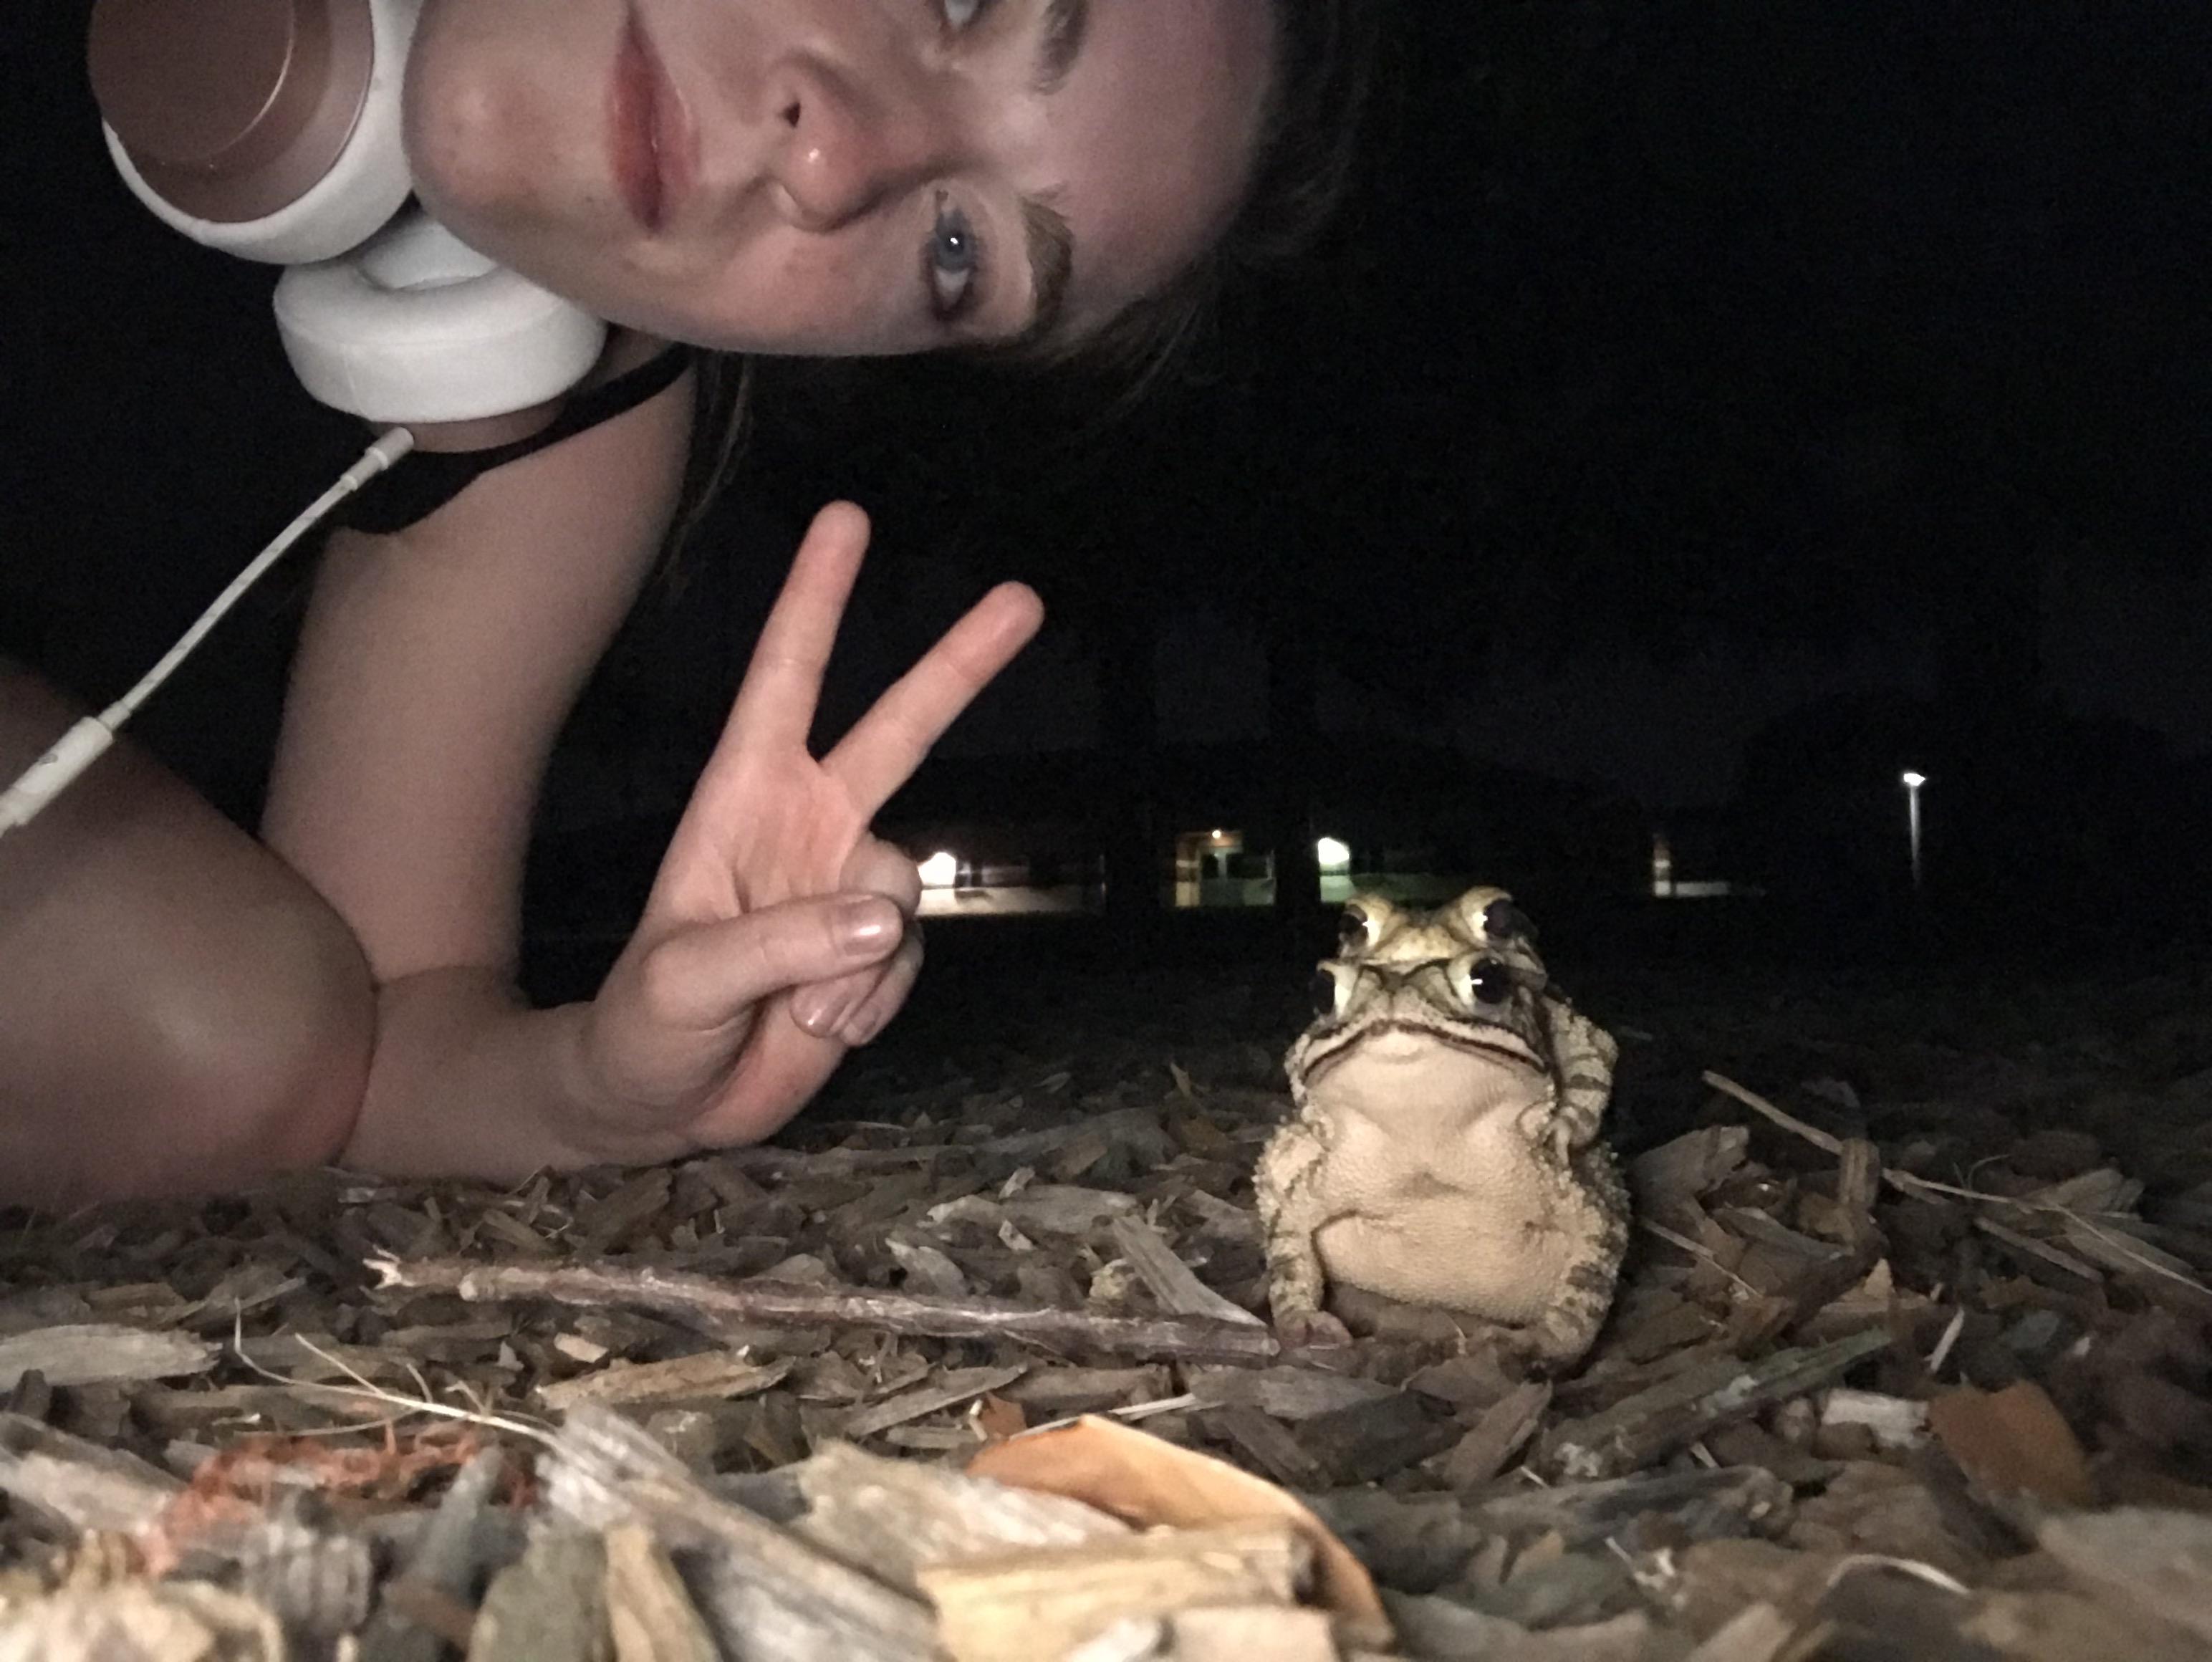 For those of you doubting how many pictures I actually take with toads, here’s another. Just me n the besties